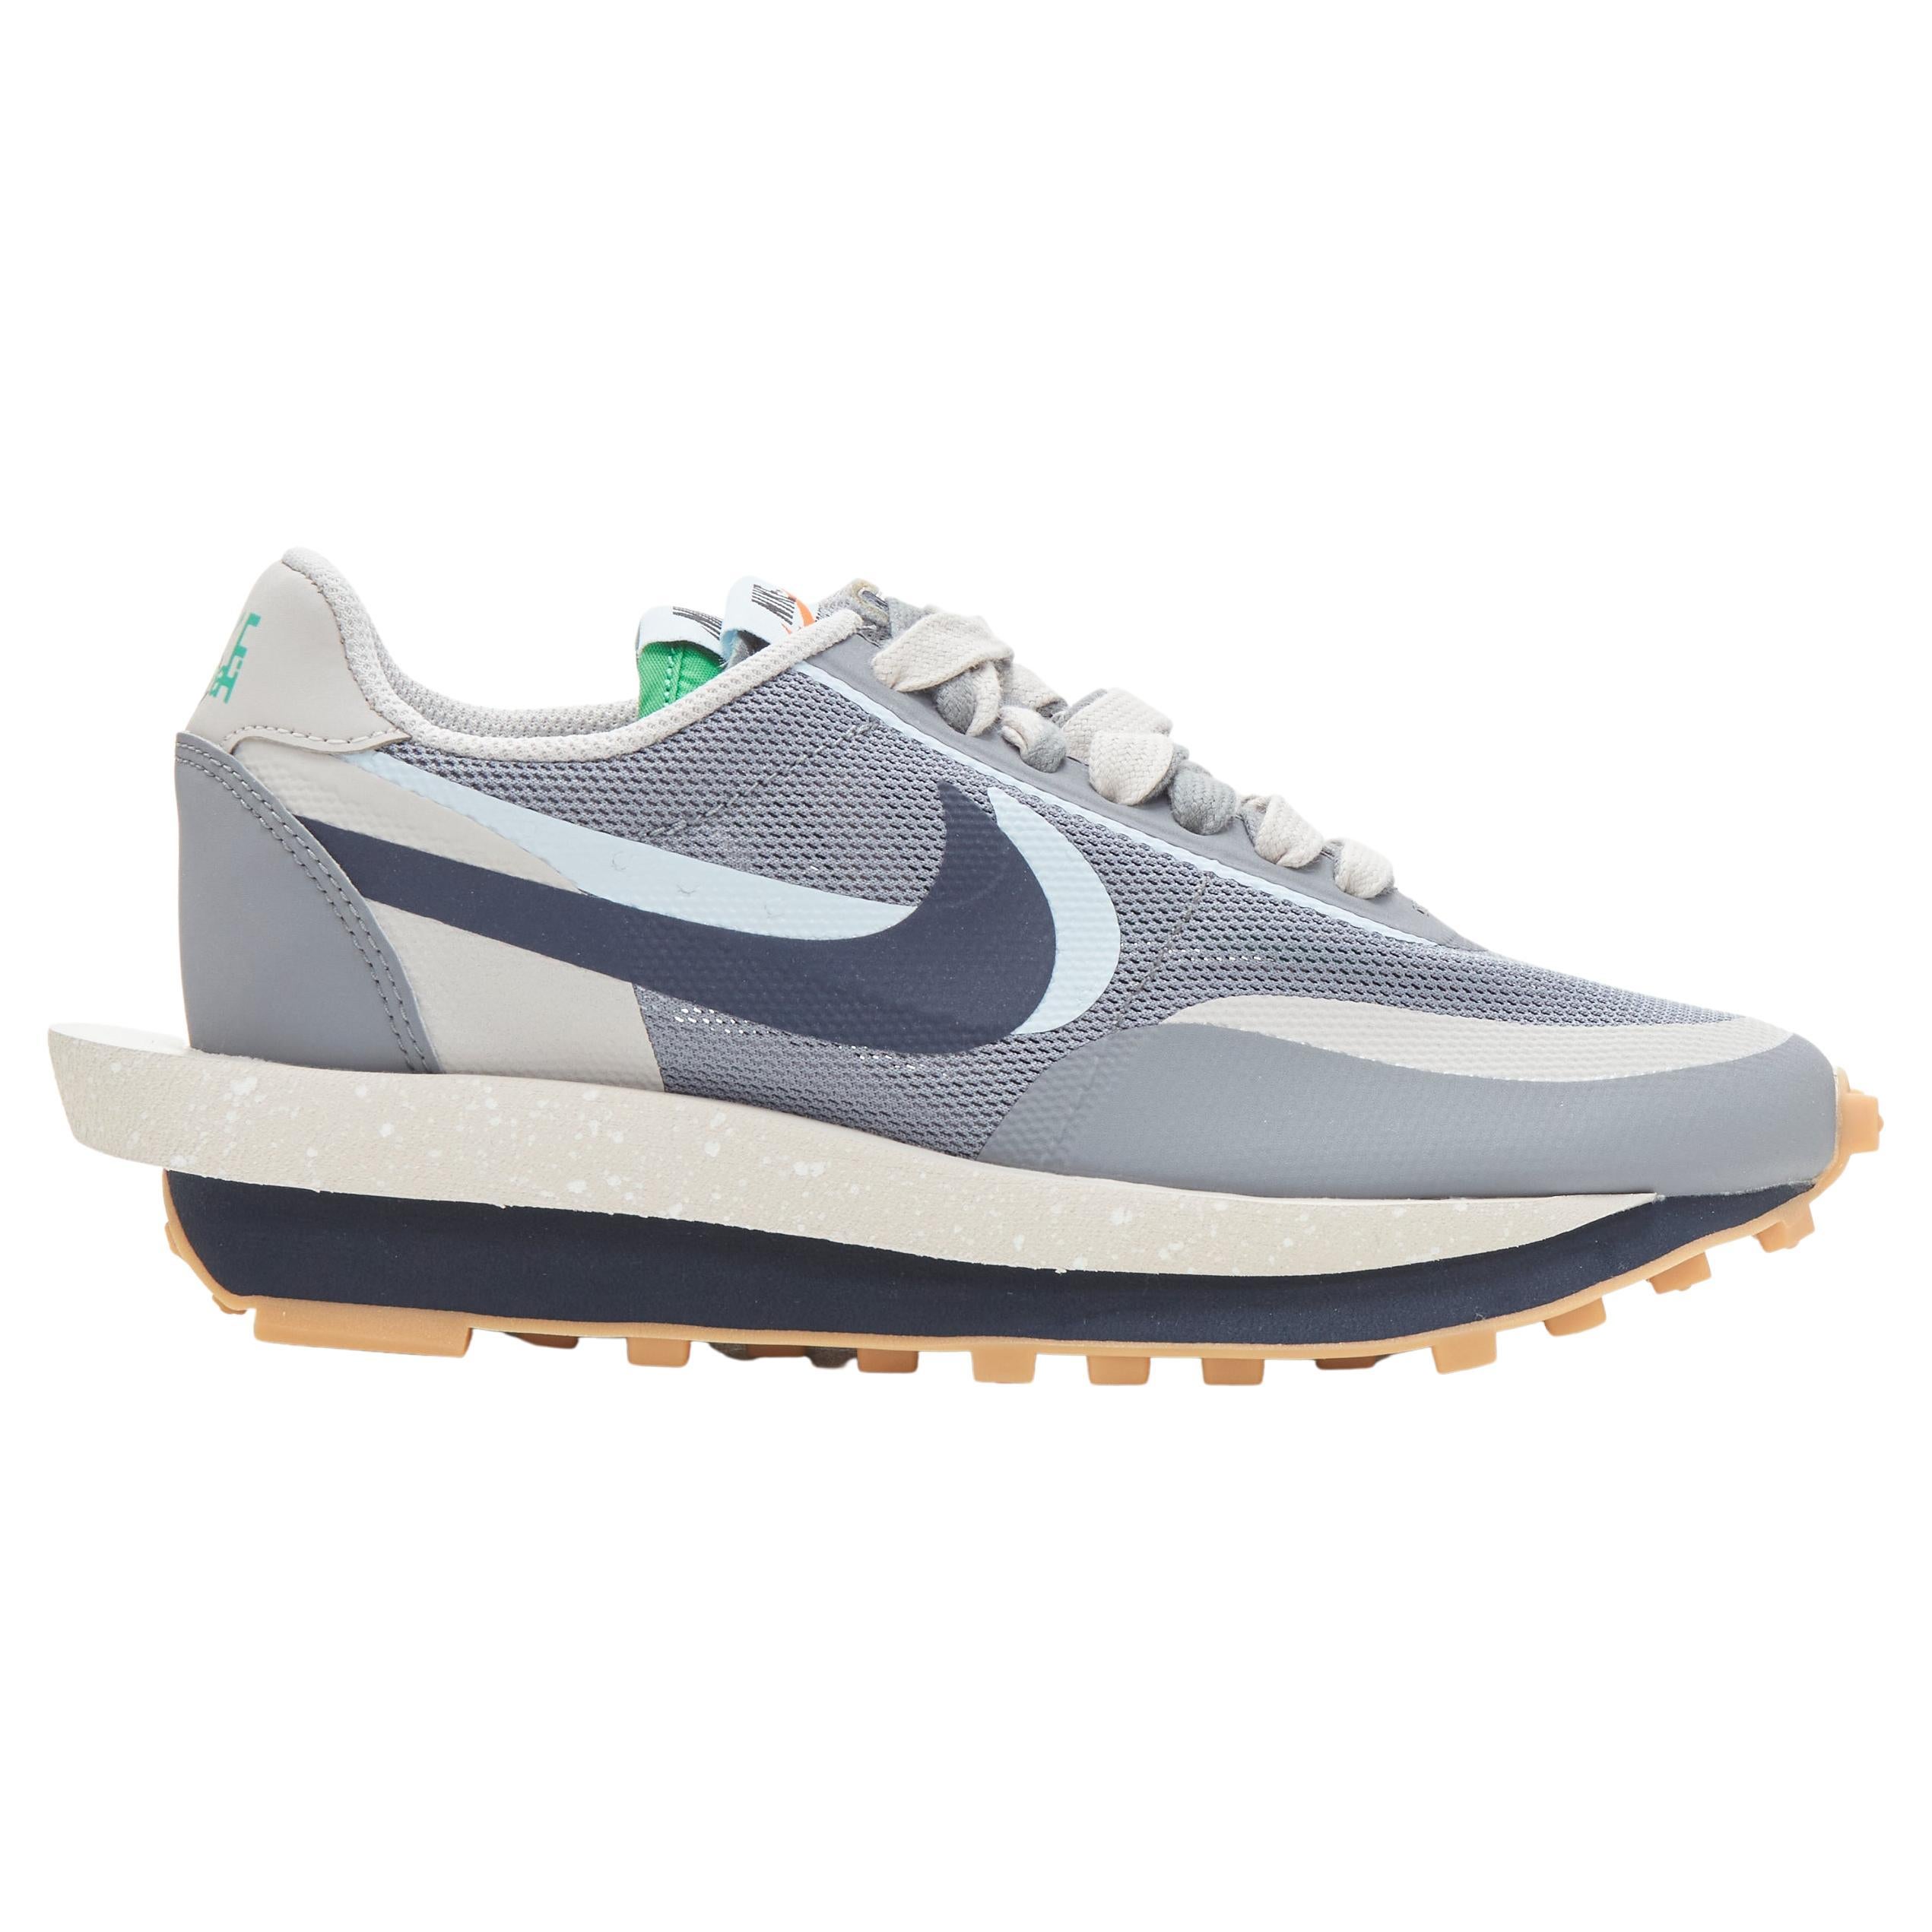 NIKE SACAI CLOT LD Waffle DH3114 001 grey navy sneaker US5 EU37.5 For Sale  at 1stDibs | jimmy waffle on origin, dh3114-001, nike 37c white and gold